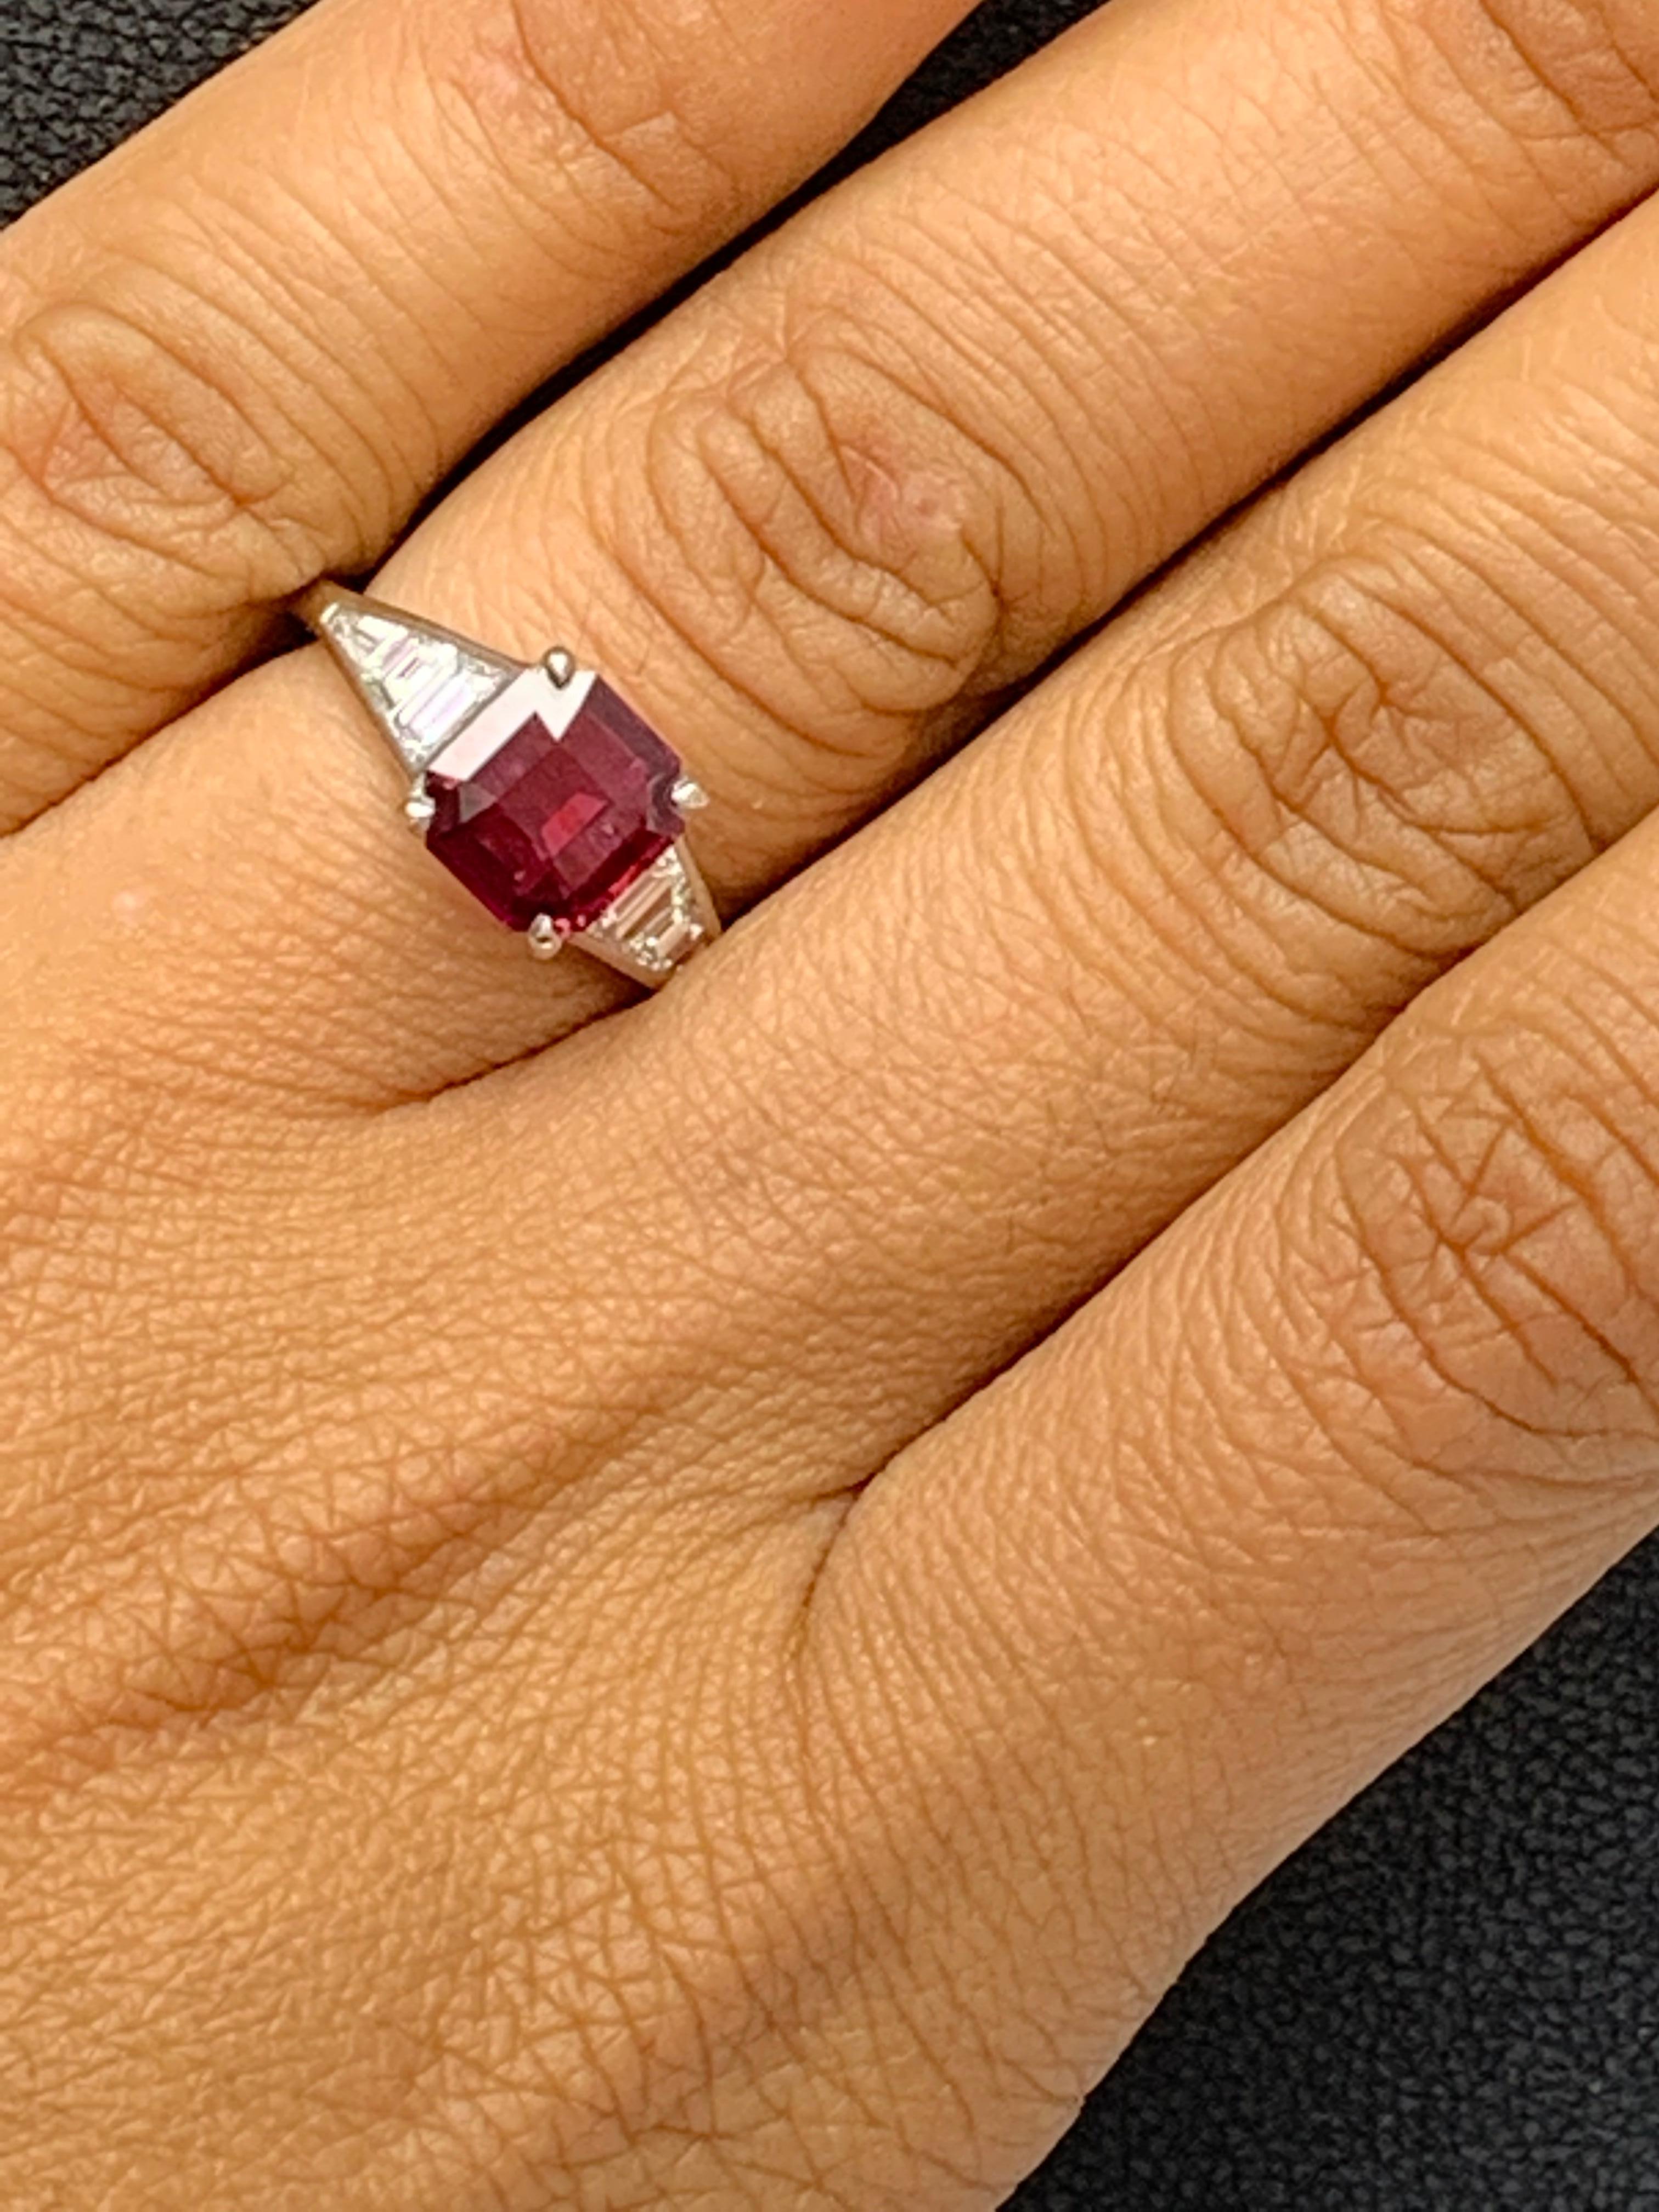 2.11 Carat Emerald Cut Ruby and Diamond Engagement Ring in Platinum For Sale 13